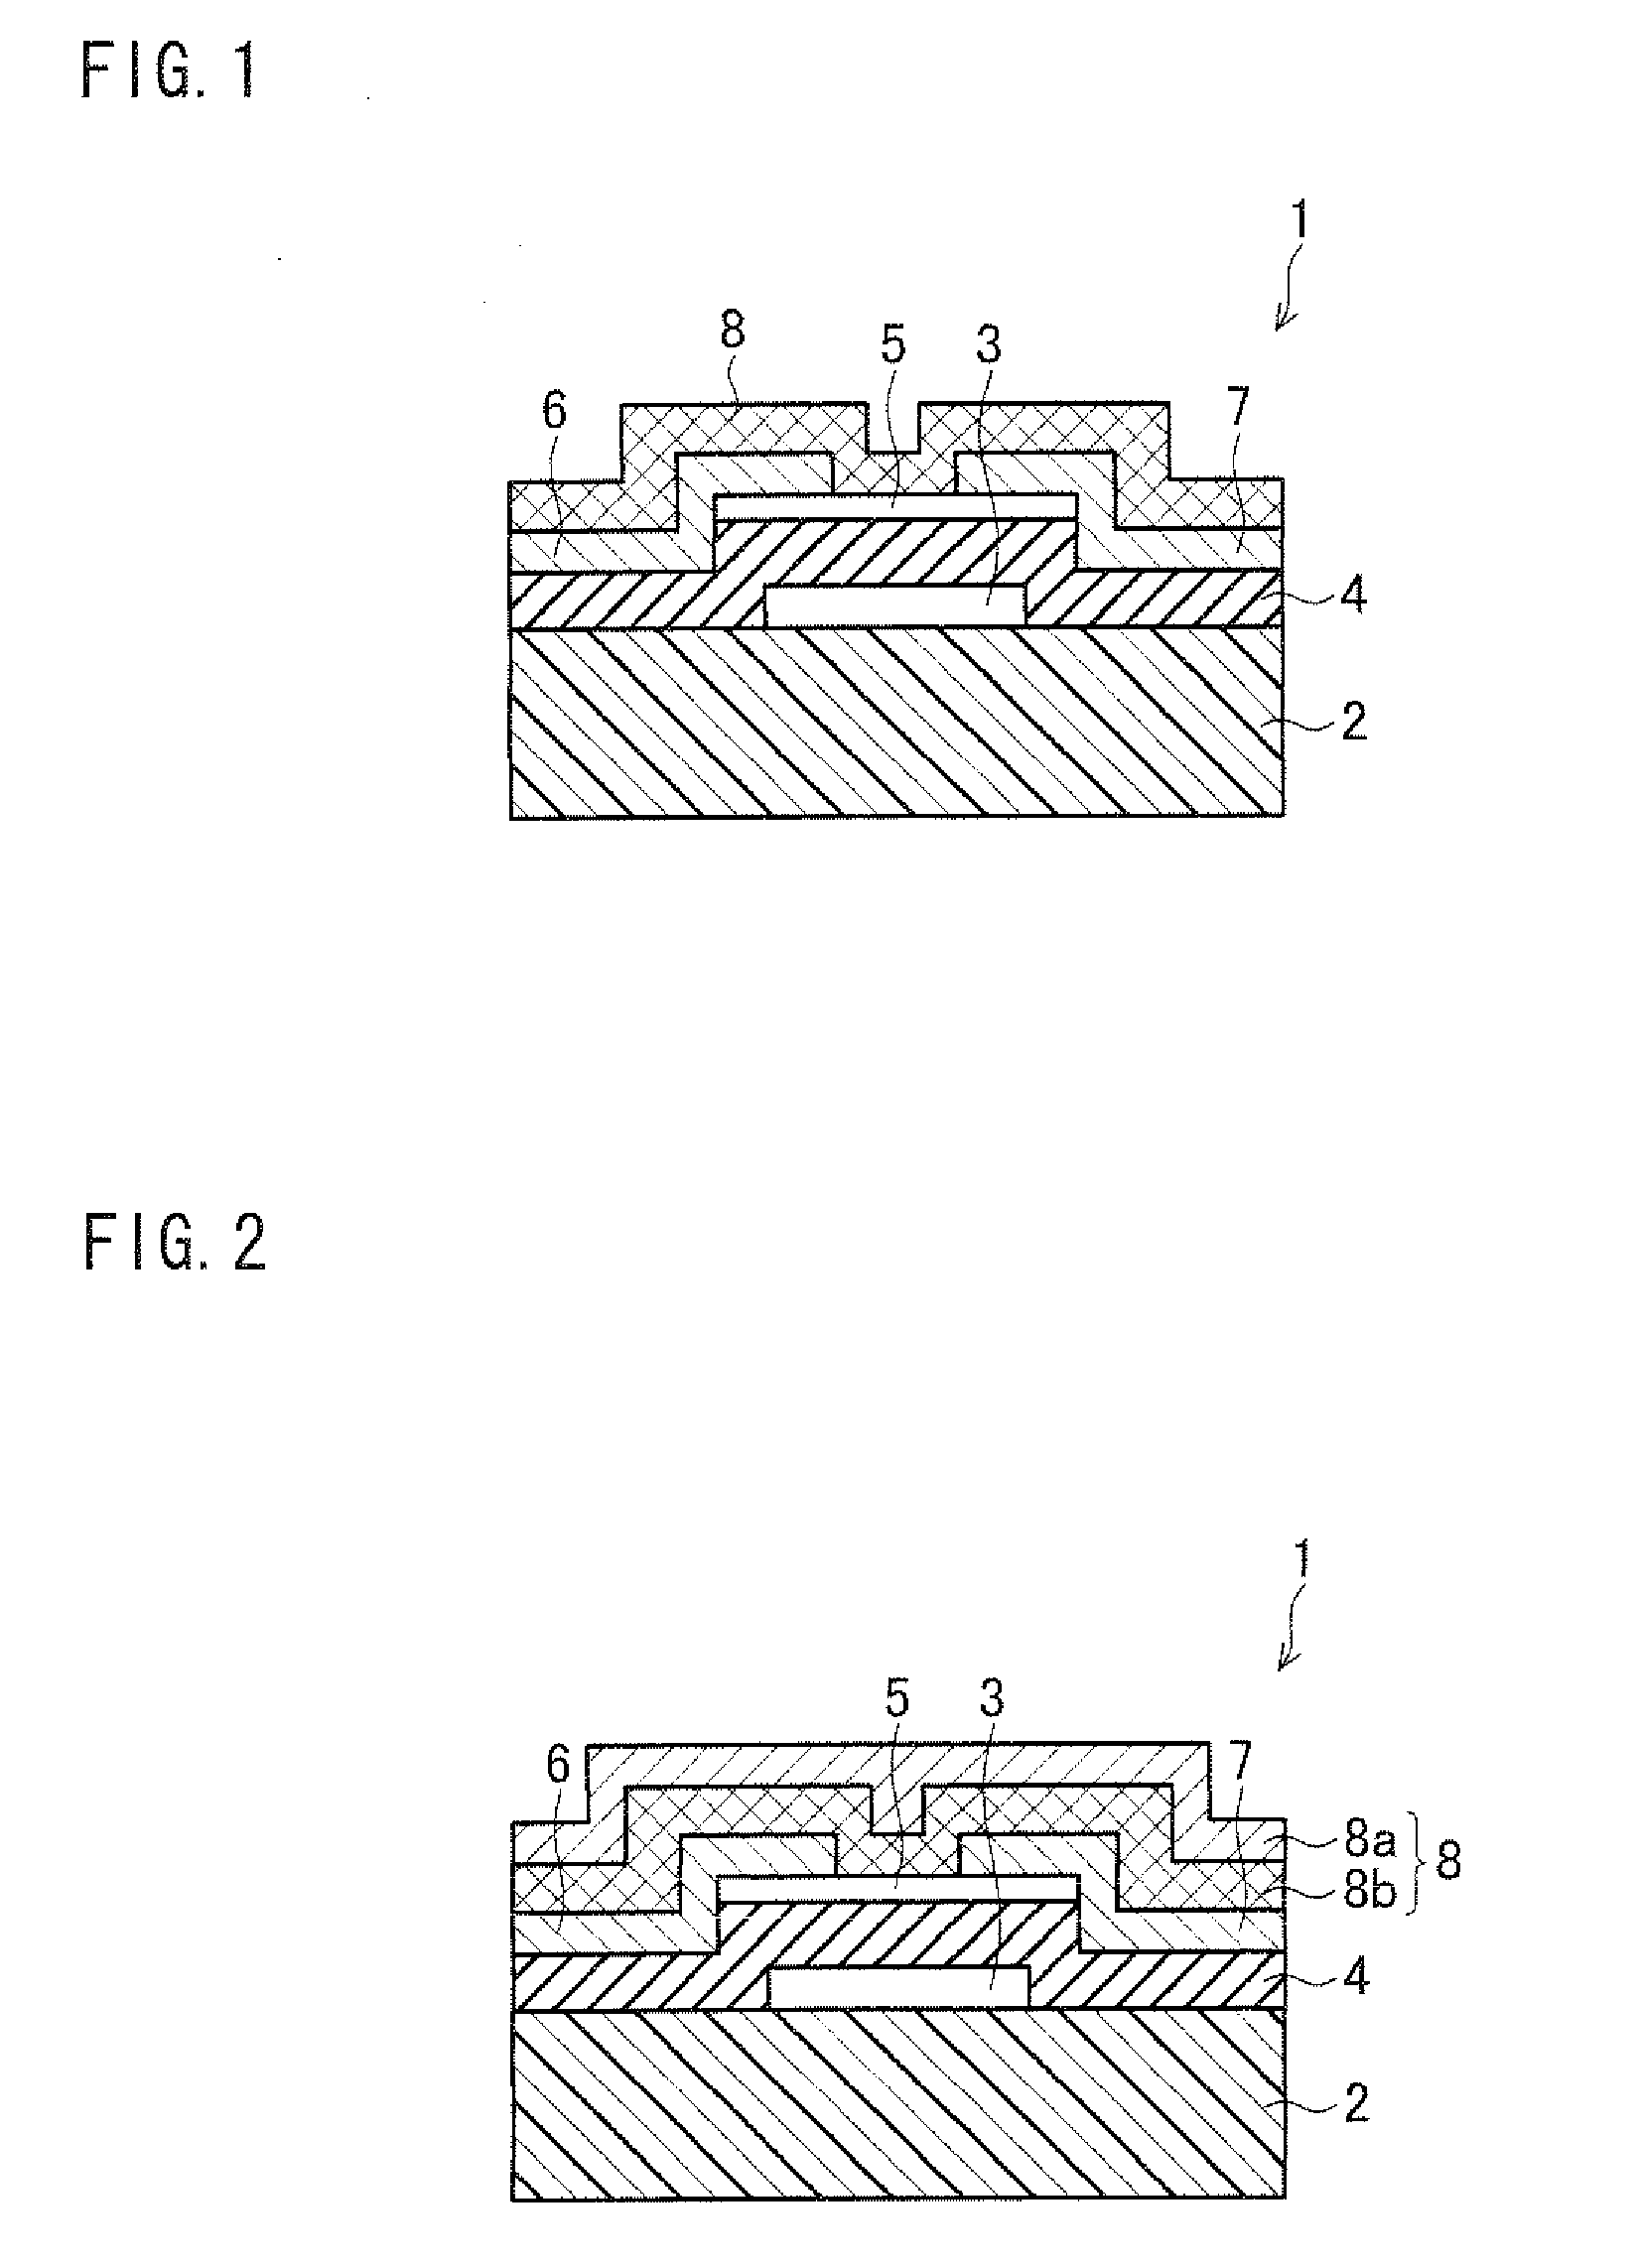 Semiconductor element, method for manufacturing same, and electronic device including same